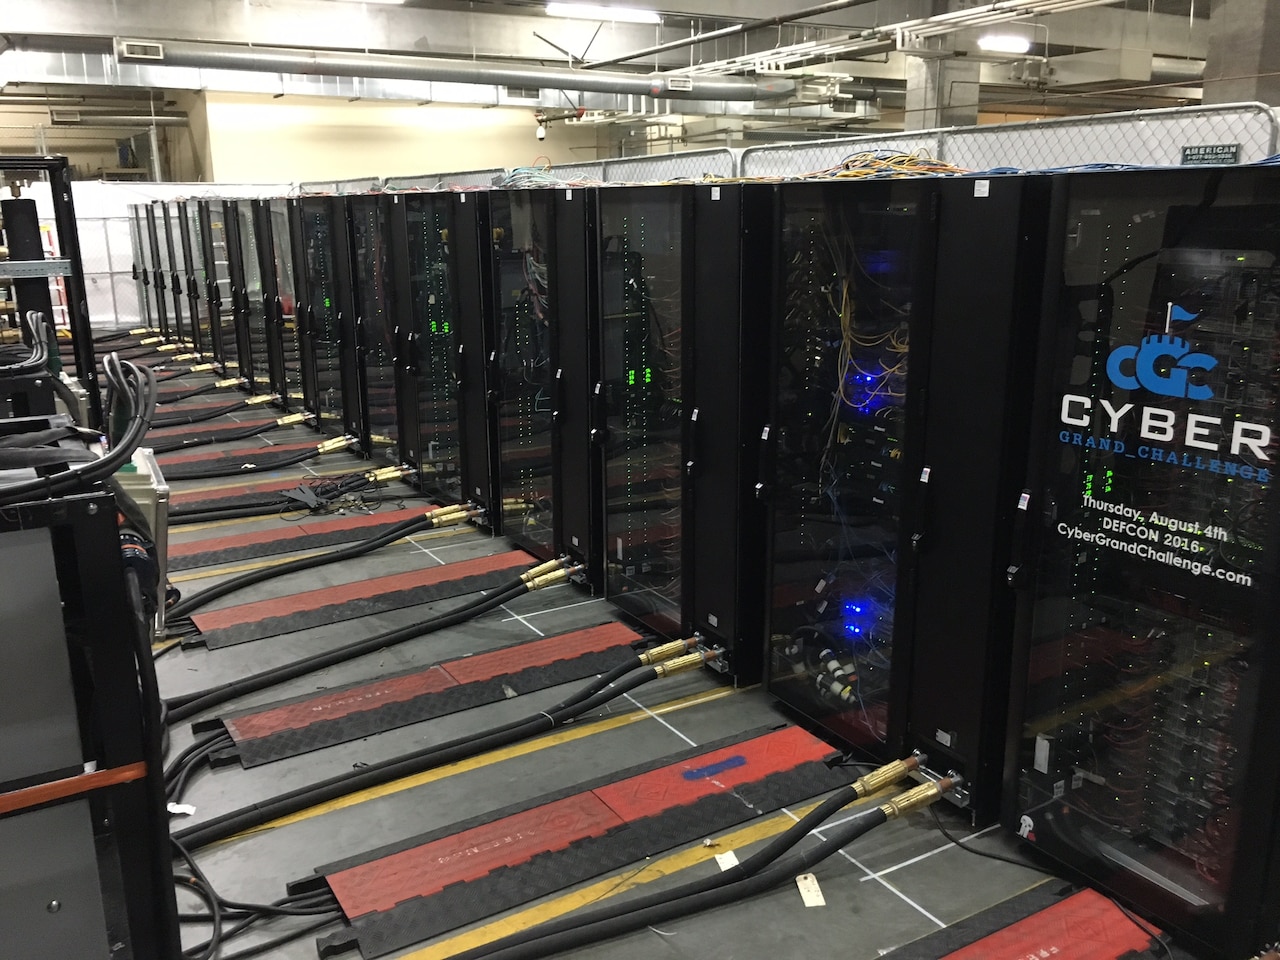 These racks, with cooling and power, will hold servers for the autonomous computer systems that will compete in the Defense Advanced Research Projects Agency’s Cyber Grand Challenge finals in Las Vegas, Aug. 4, 2016. DARPA photo